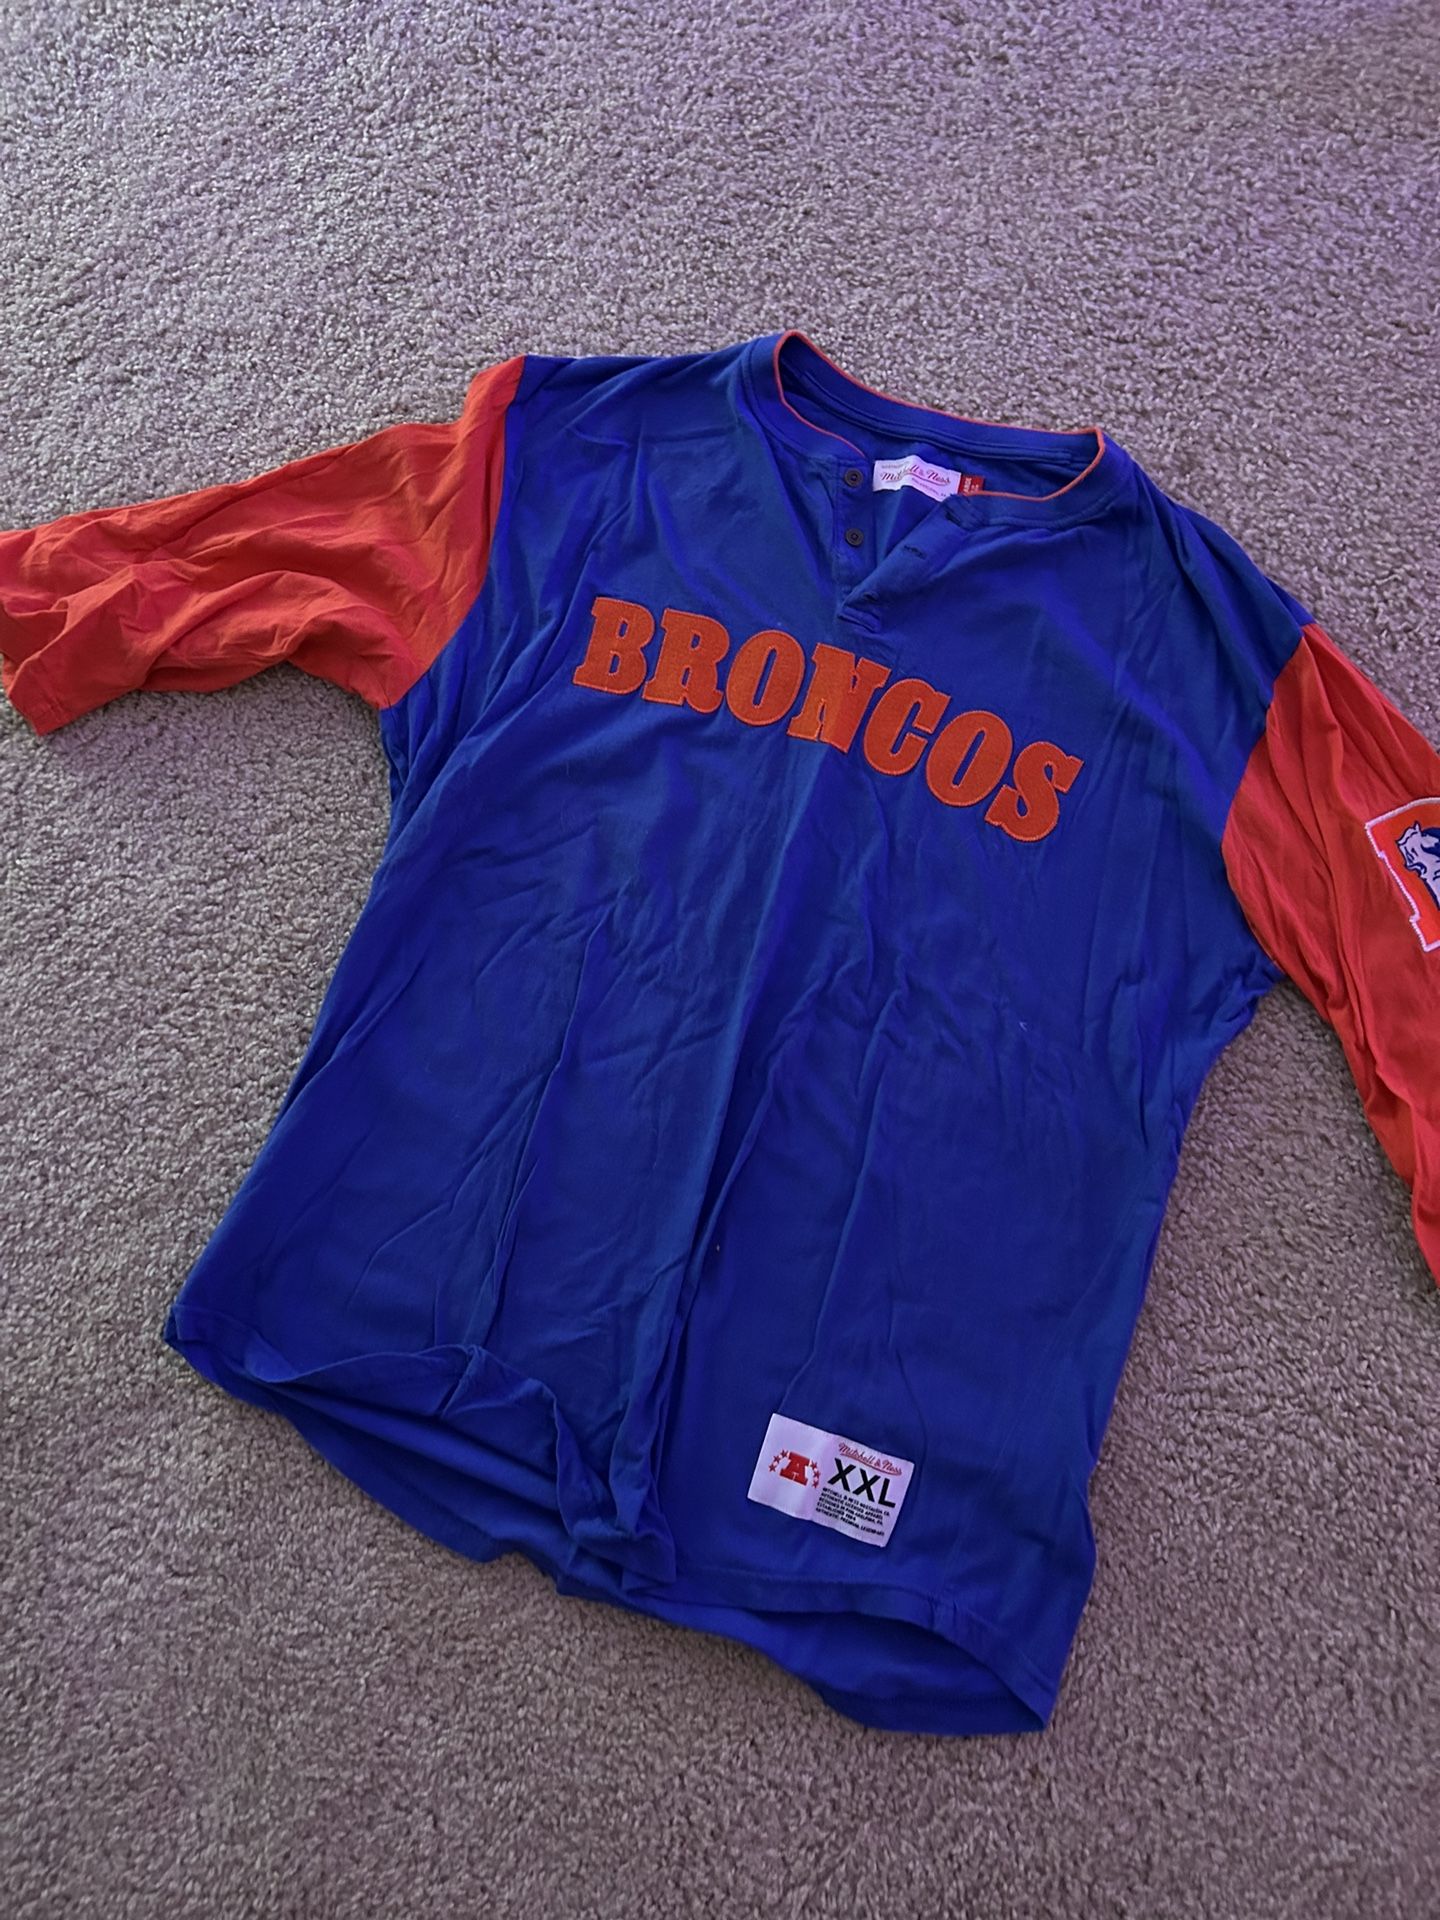 Broncos Jersey by Mitchell & Ness (XXL) for Sale in Bremerton, WA